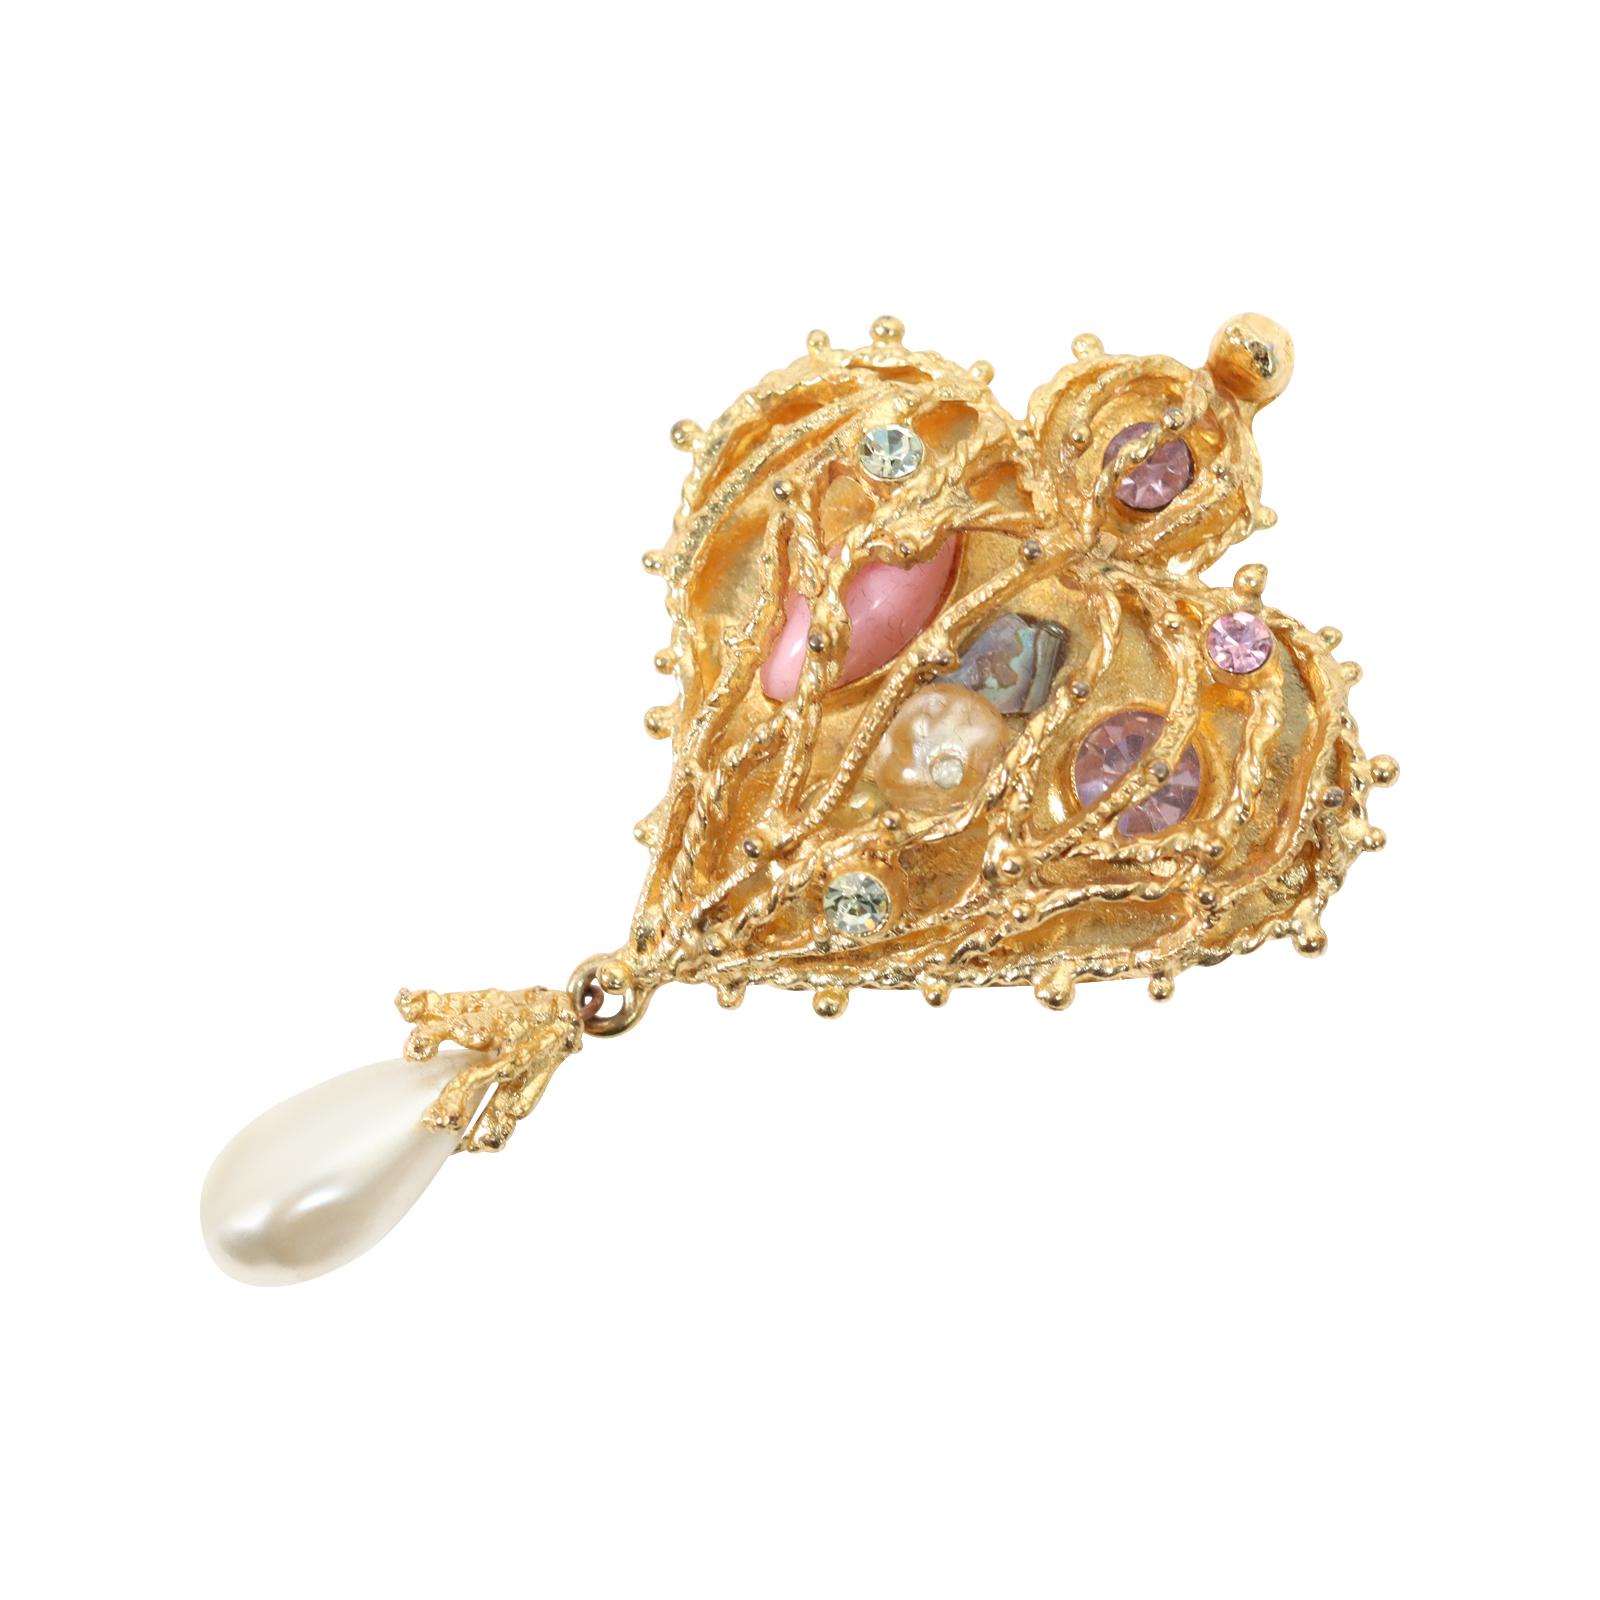 Artist Vintage Christian Lacroix Dangling Gold Tone Pearl Brooch Circa 1990s For Sale